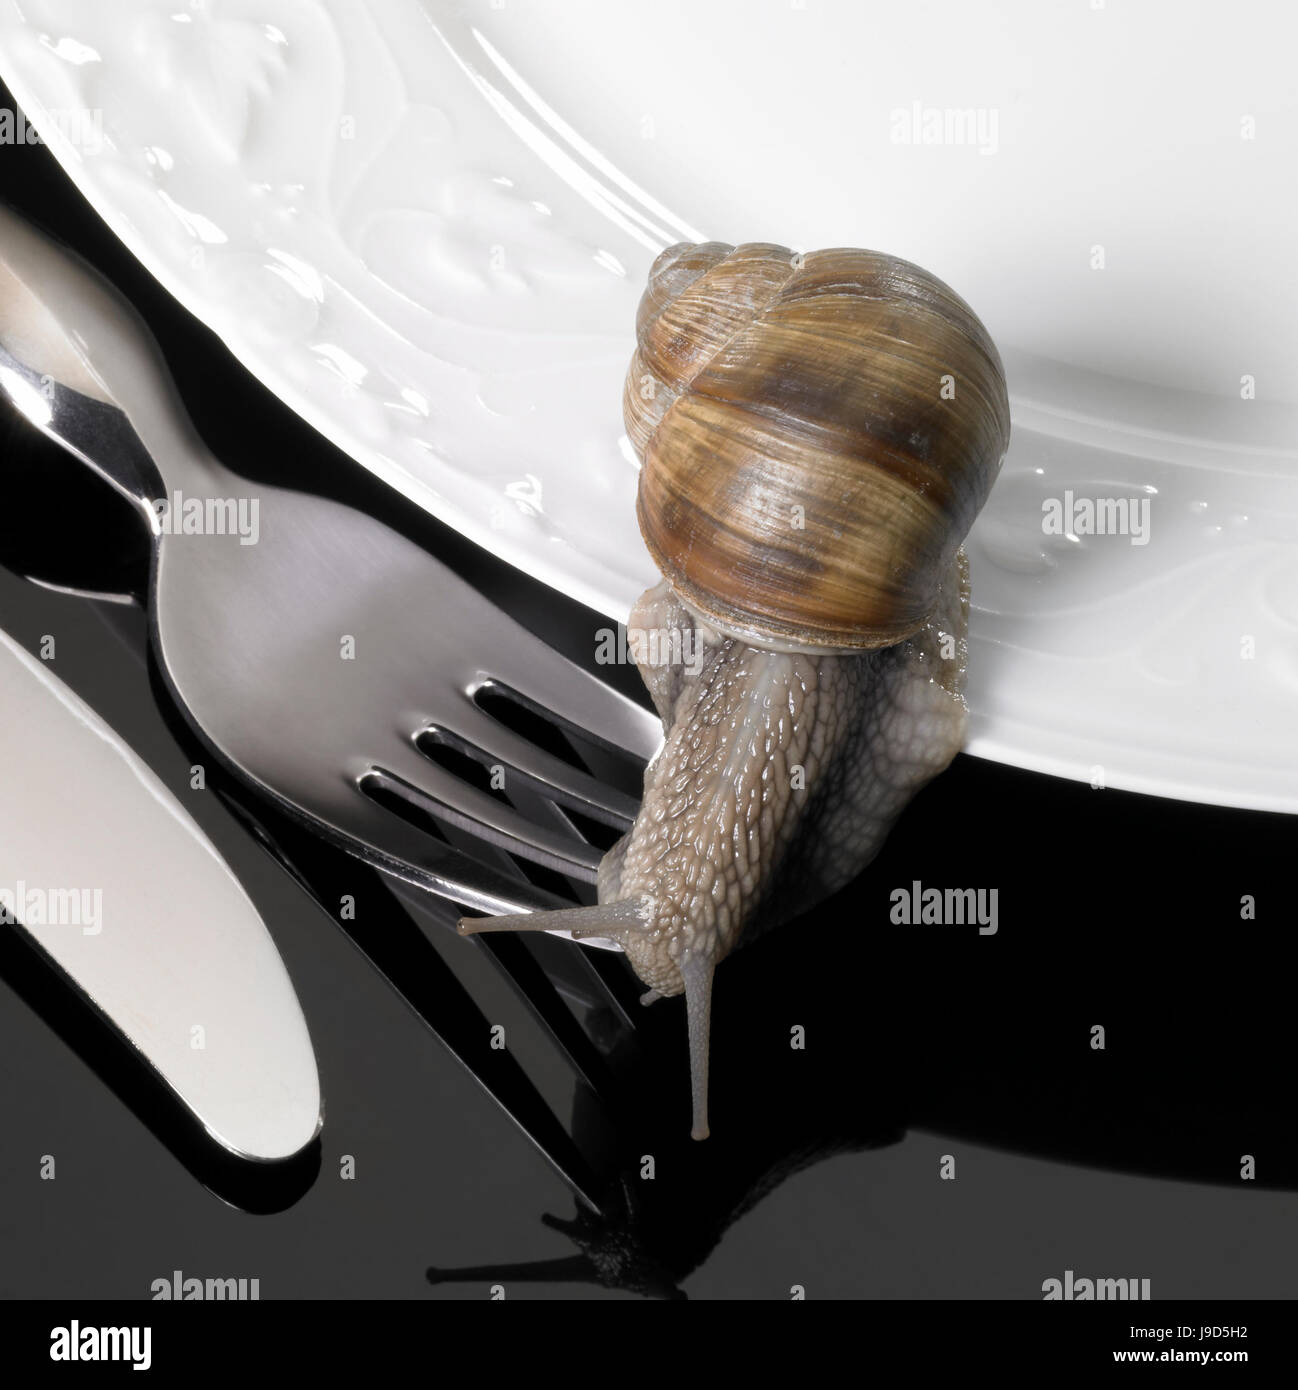 snail, edible snail, fork, cutlery, harness, motion, postponement, moving, Stock Photo